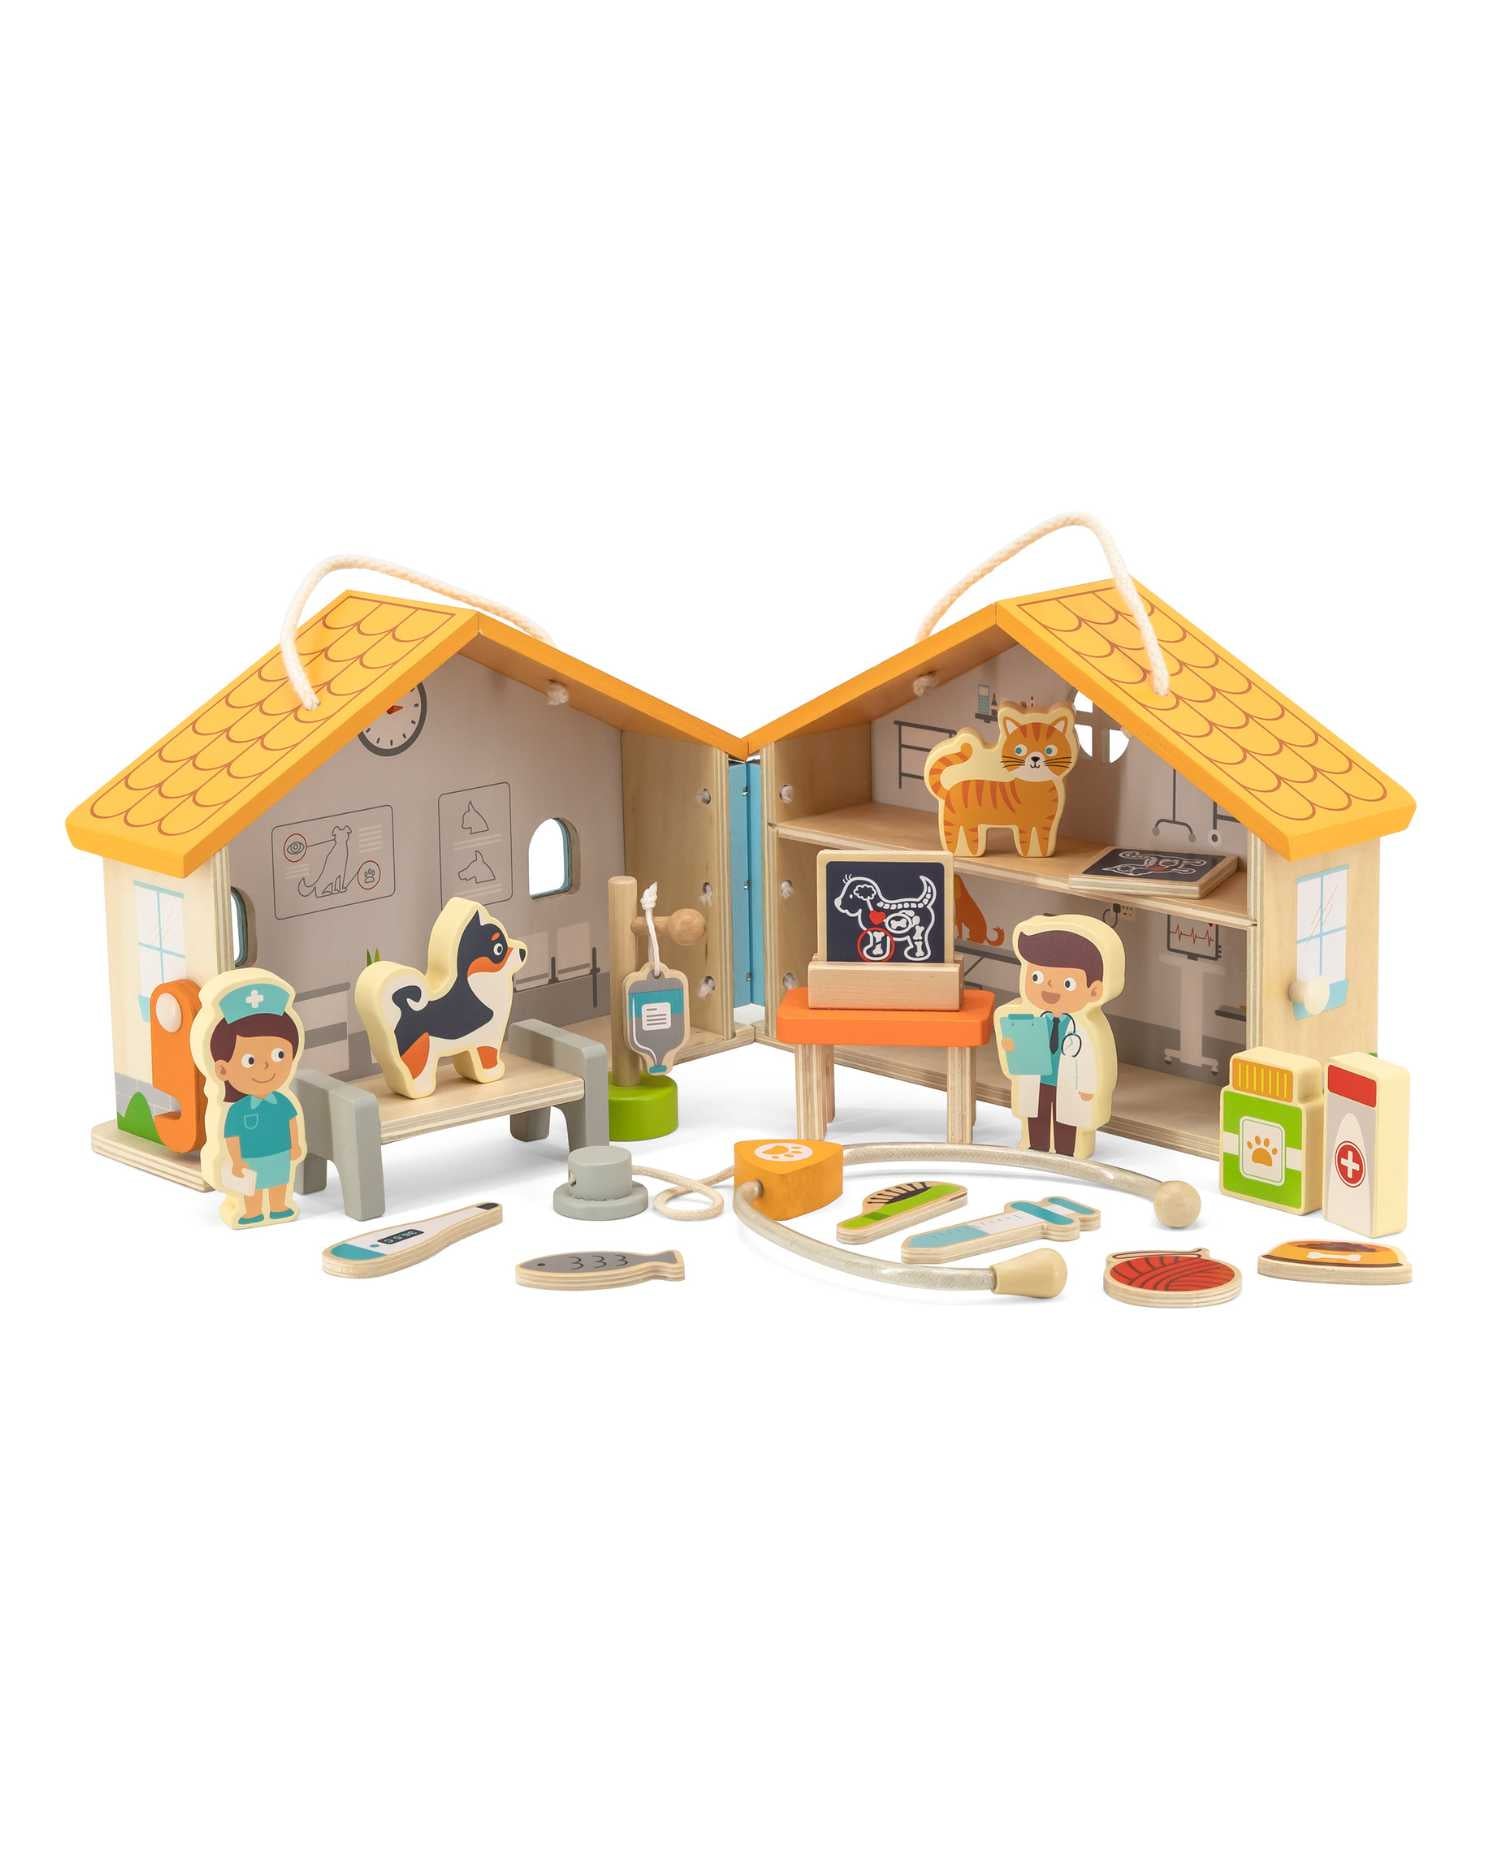 close up view of vet playset on white background